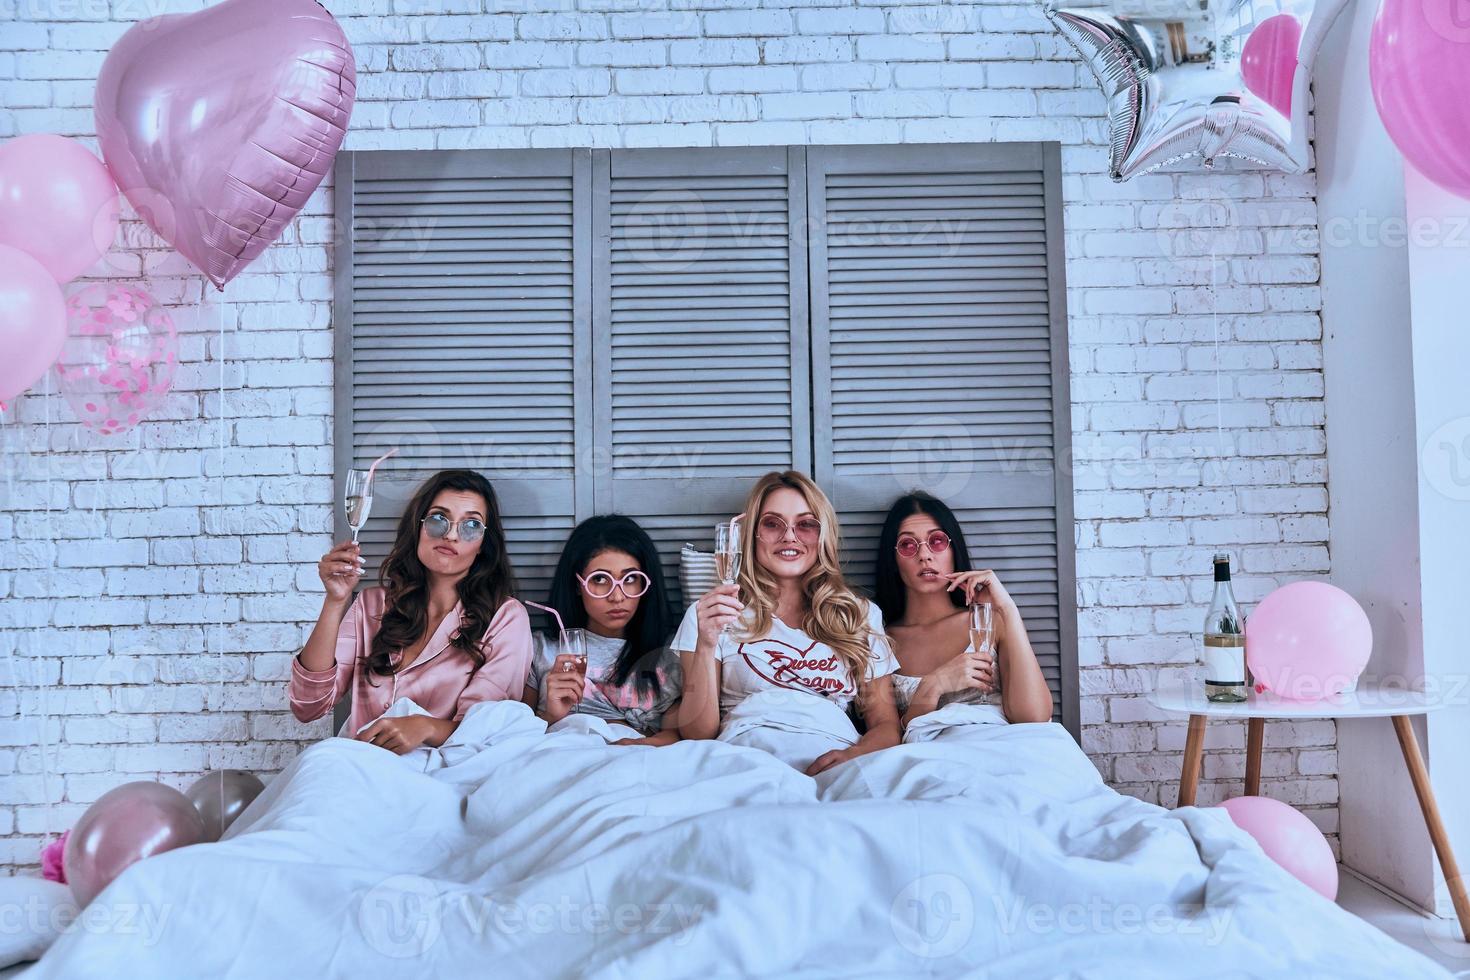 So much fun Four attractive young women in pajamas drinking cocktails while lying in the bed with balloons all over the room photo